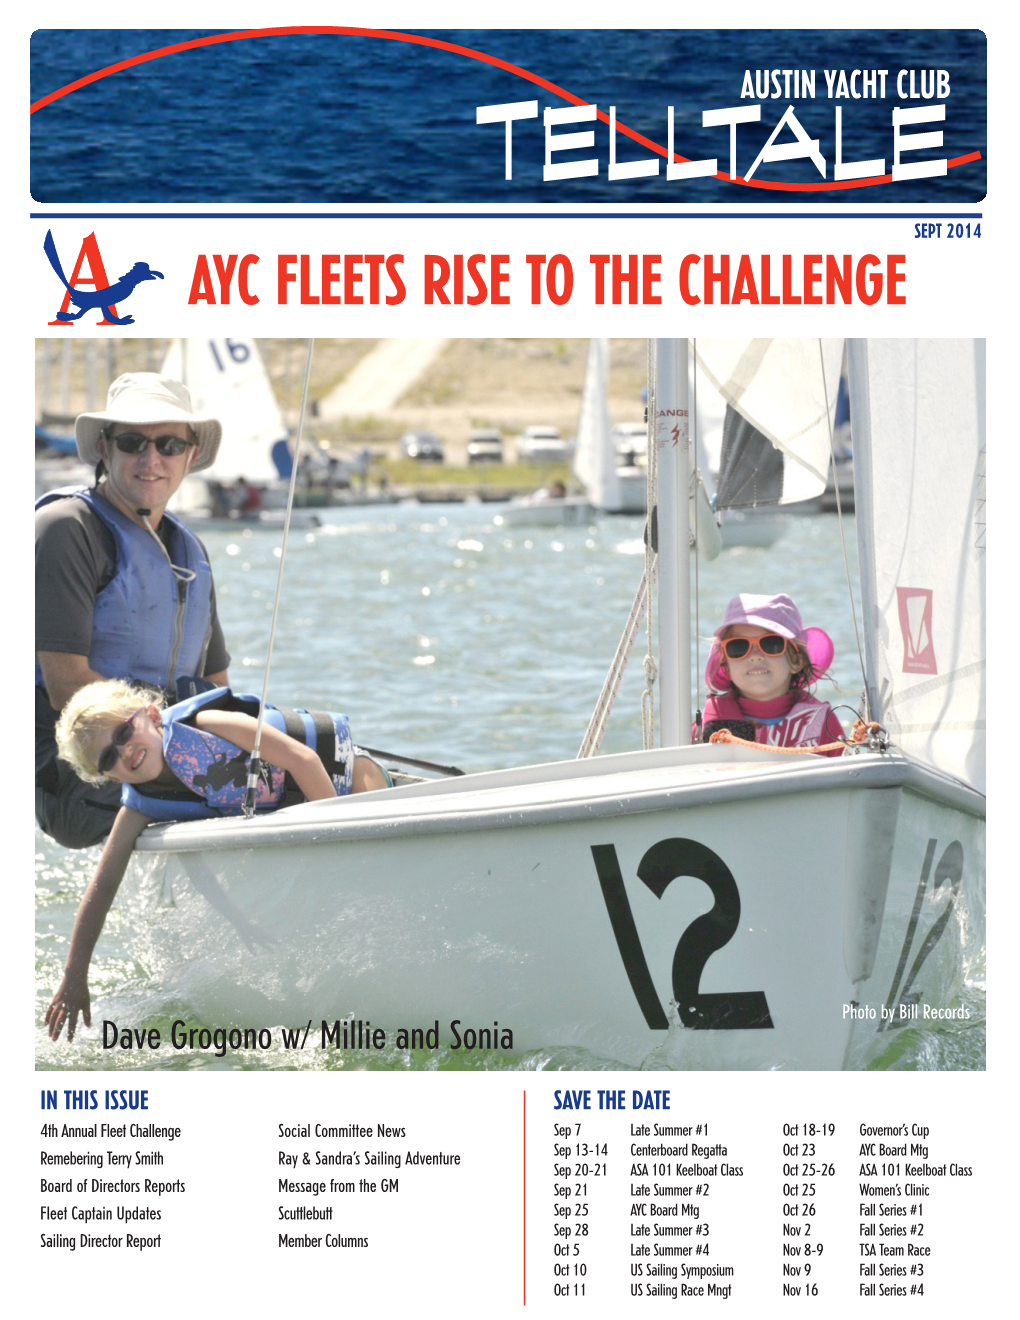 Ayc Fleets Rise to the Challenge